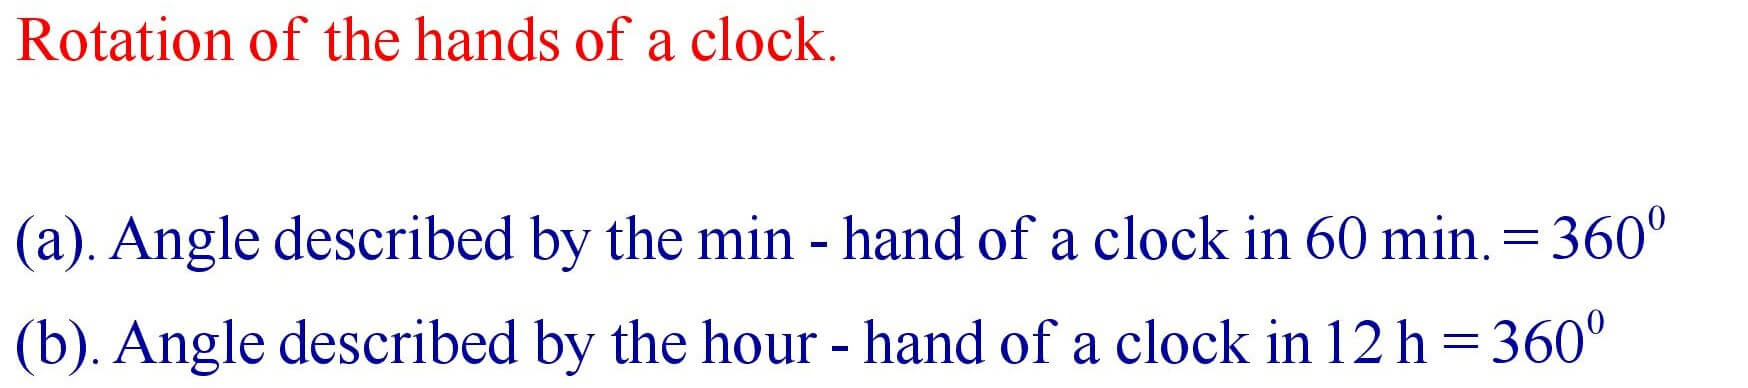 Rotation of the hands of a clock formula